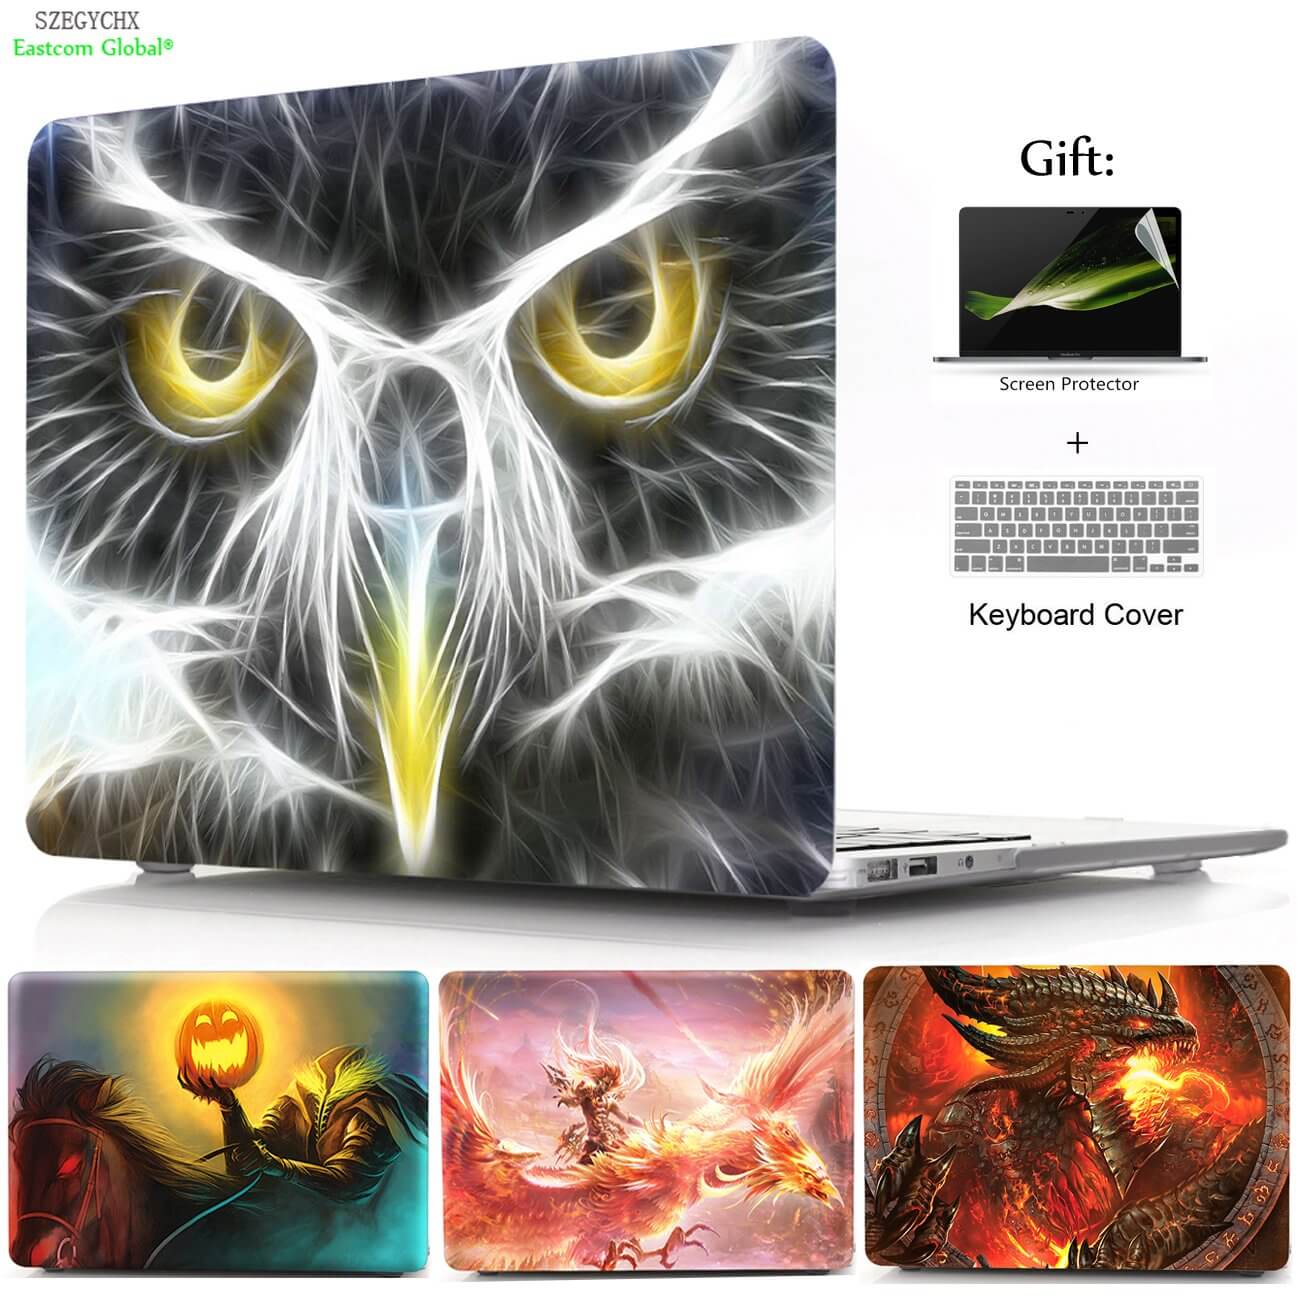 3D Cartoon Laptop Shell Protective Hard Sleeve Case For Macbook - UTILITY5STORE